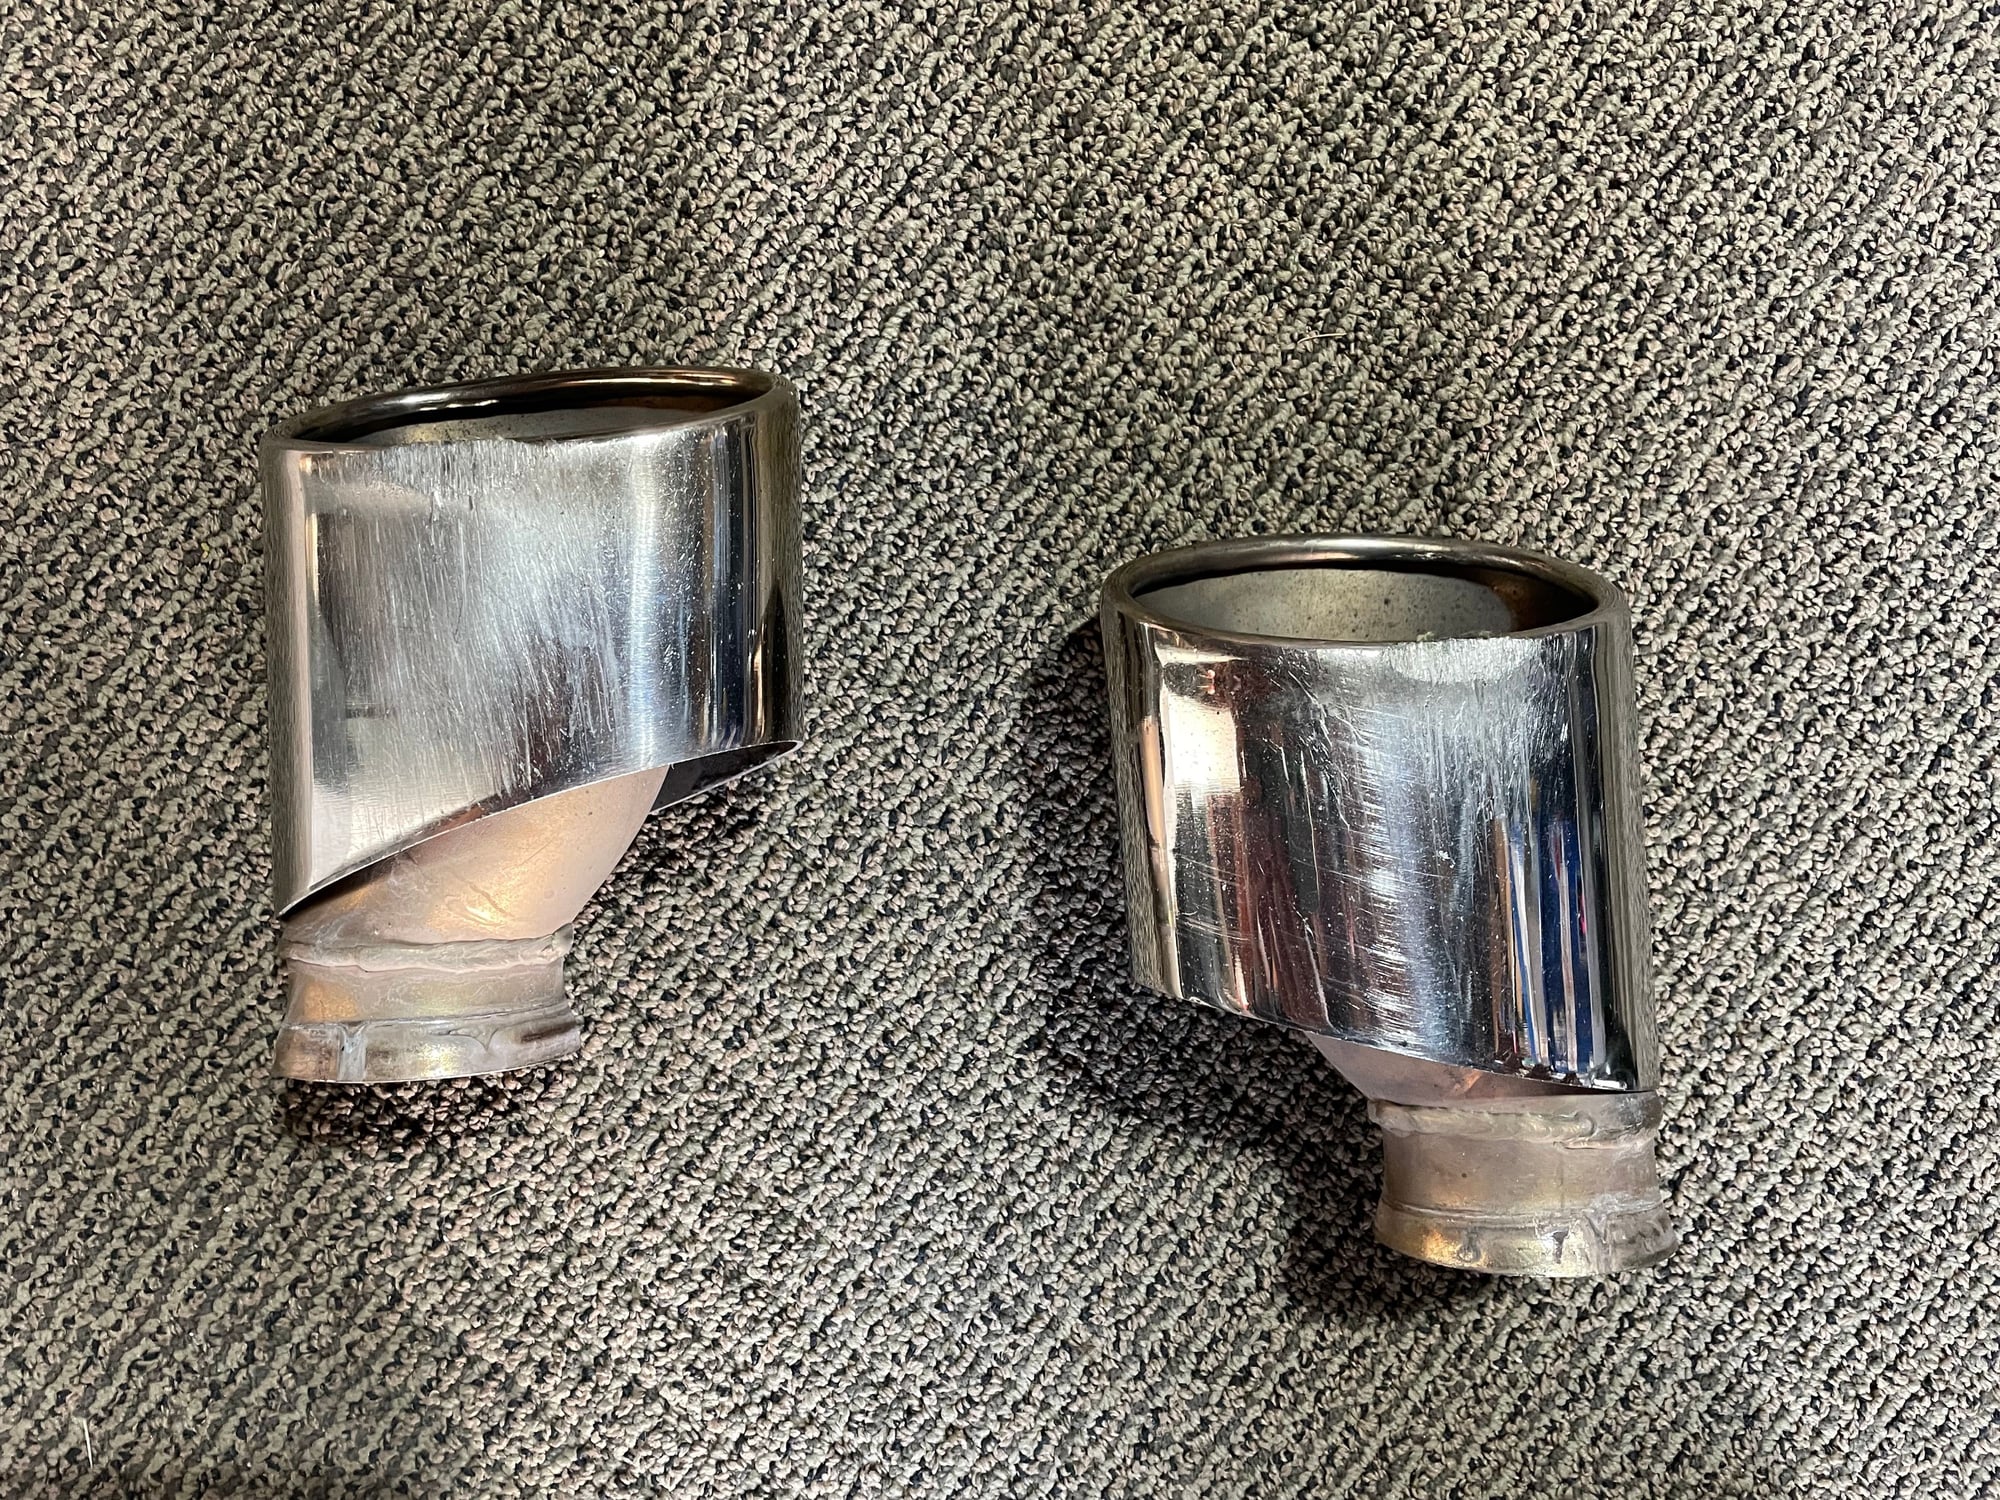 Engine - Exhaust - Fabspeed 993 rolled exhaust tips - Used - 1995 to 1998 Porsche 911 - San Francisco, CA 94112, United States